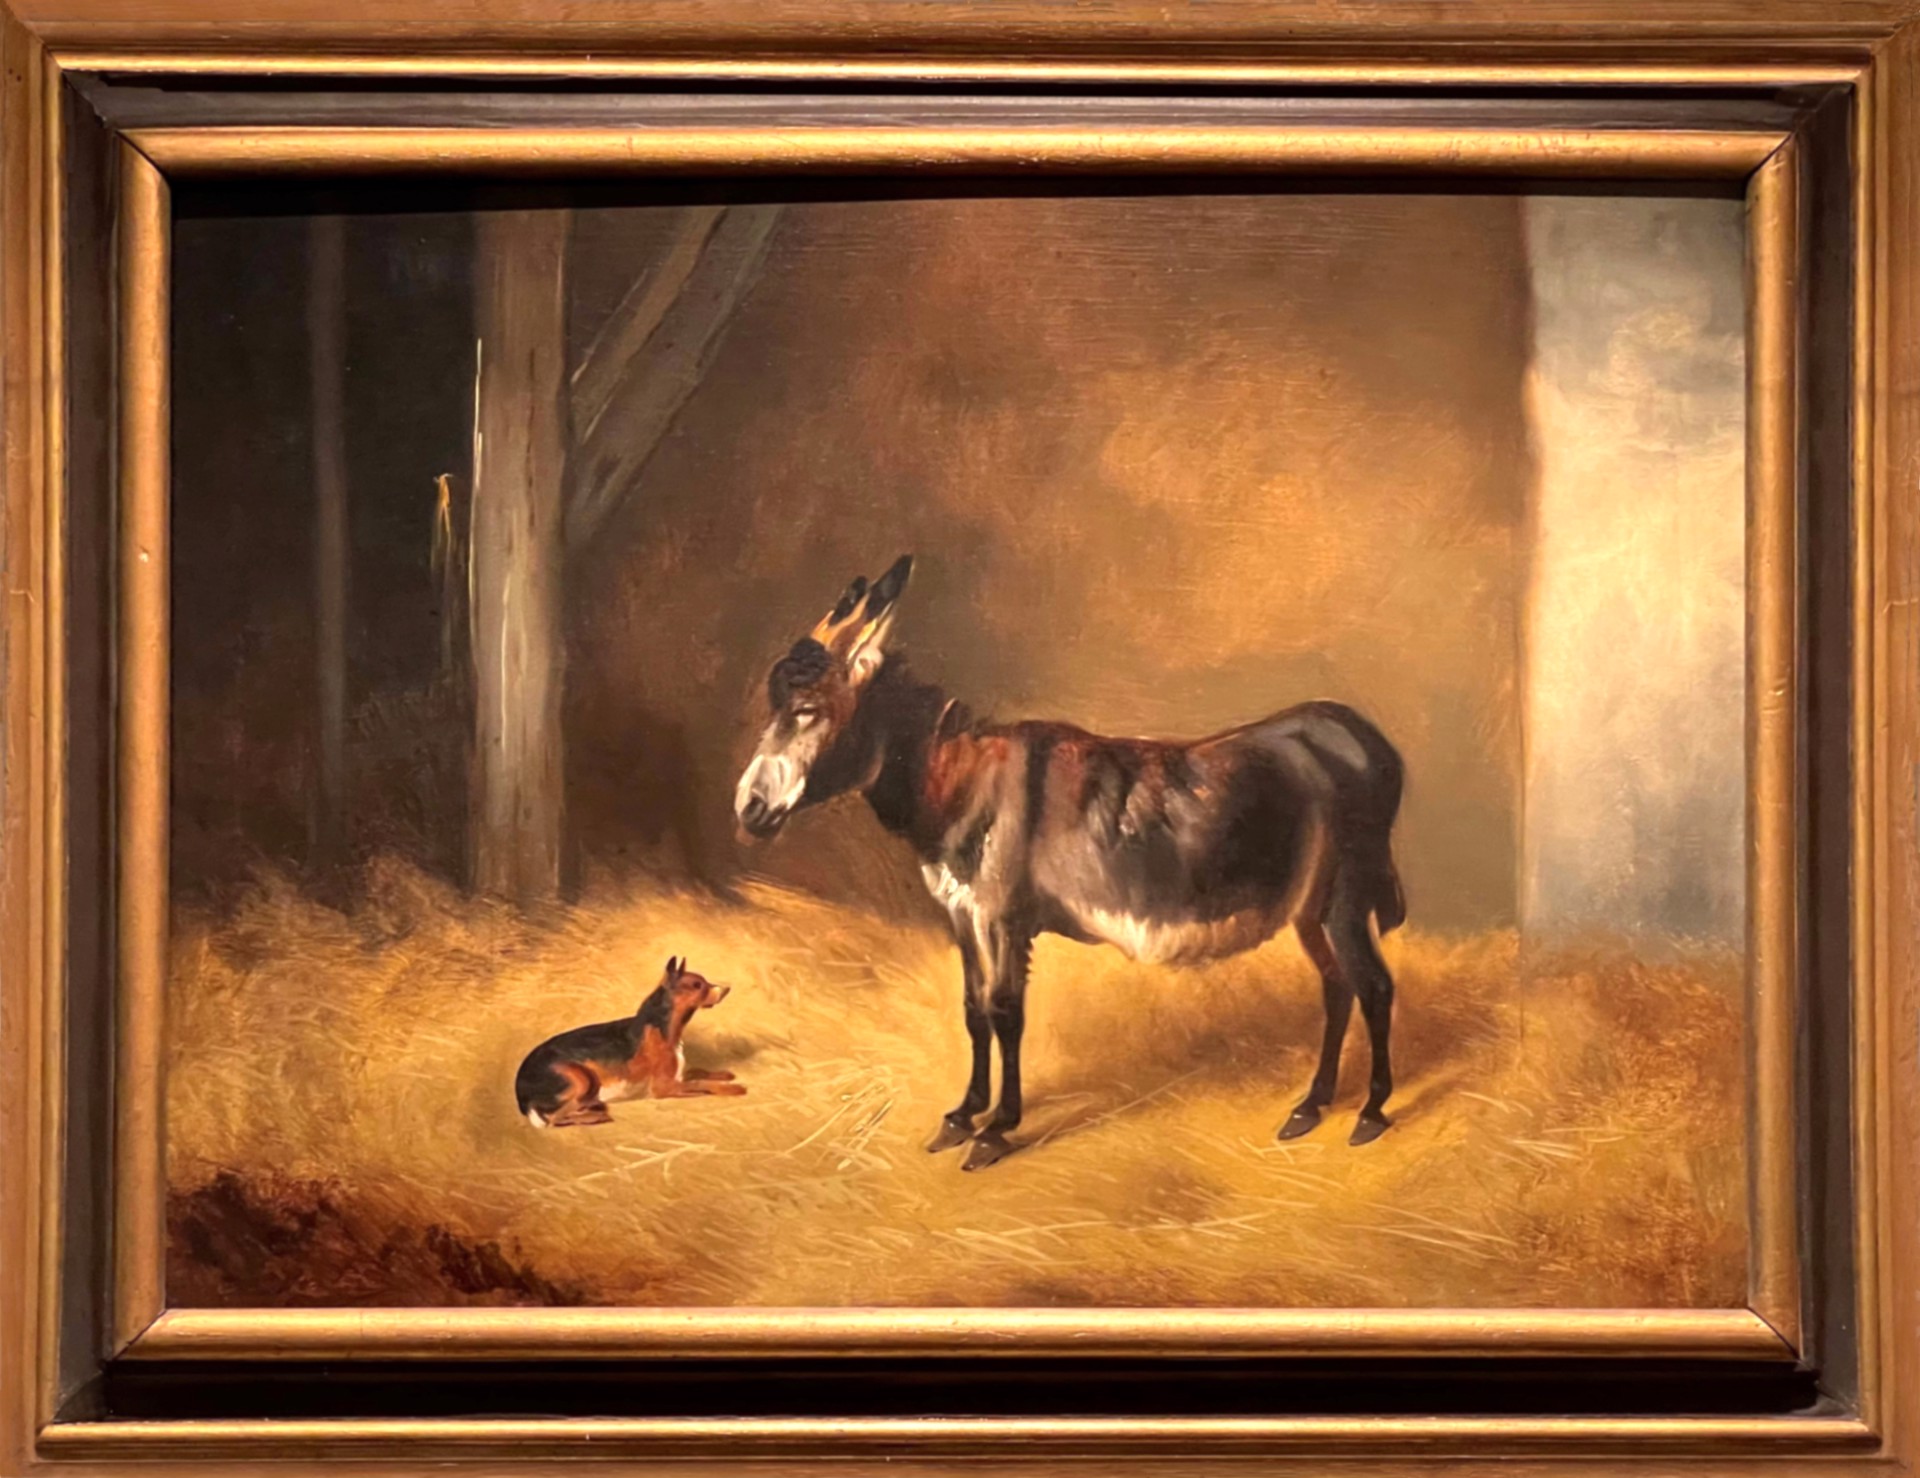 Donkey and a Dog in a Stable by John Alfred Wheeler